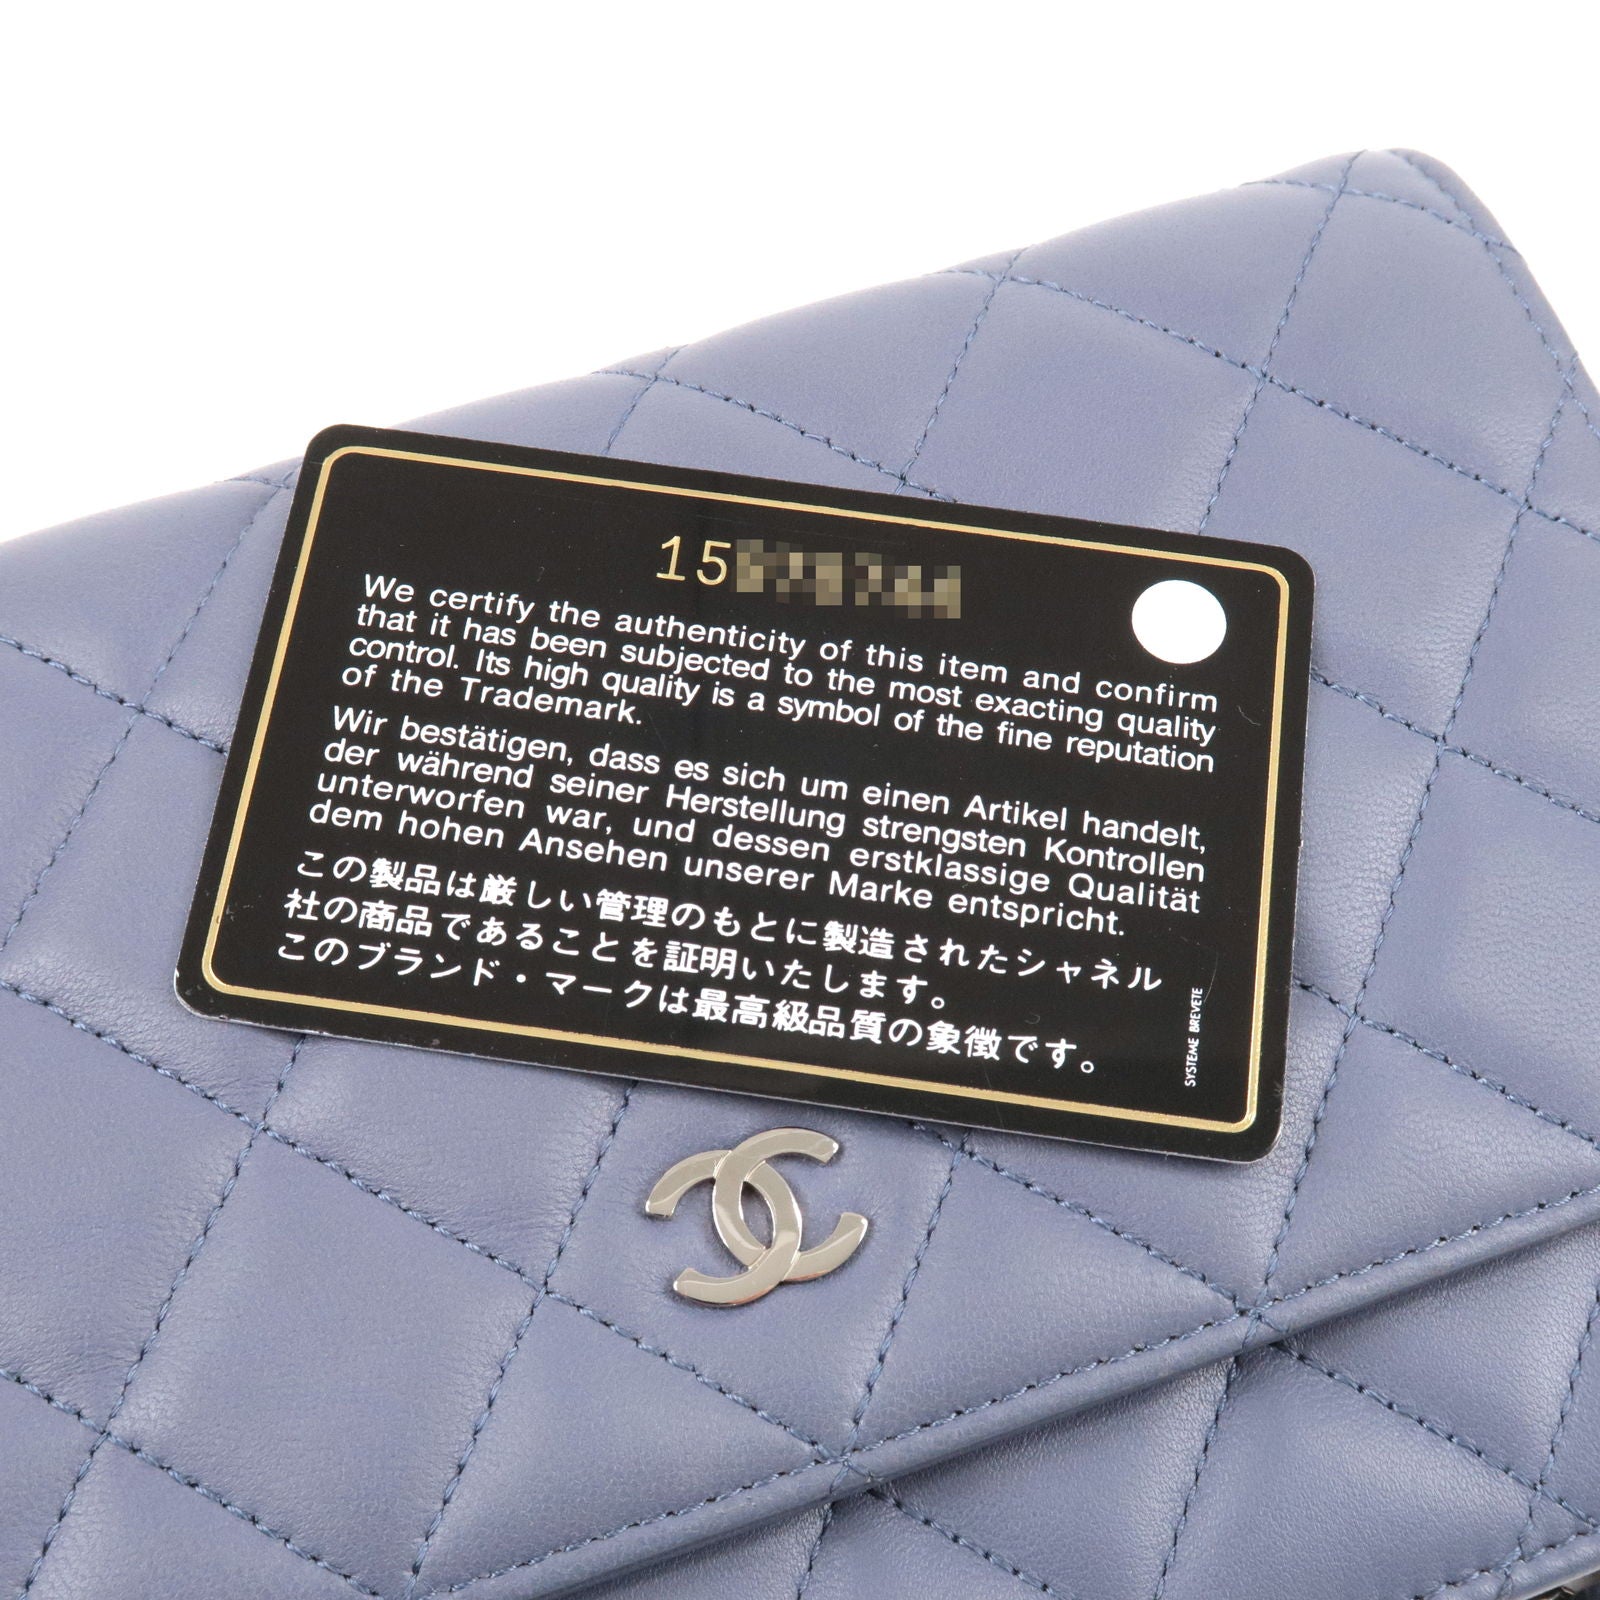 CHANEL Pre-Owned 2017 colour-block Diamond Quilted Shoulder Bag